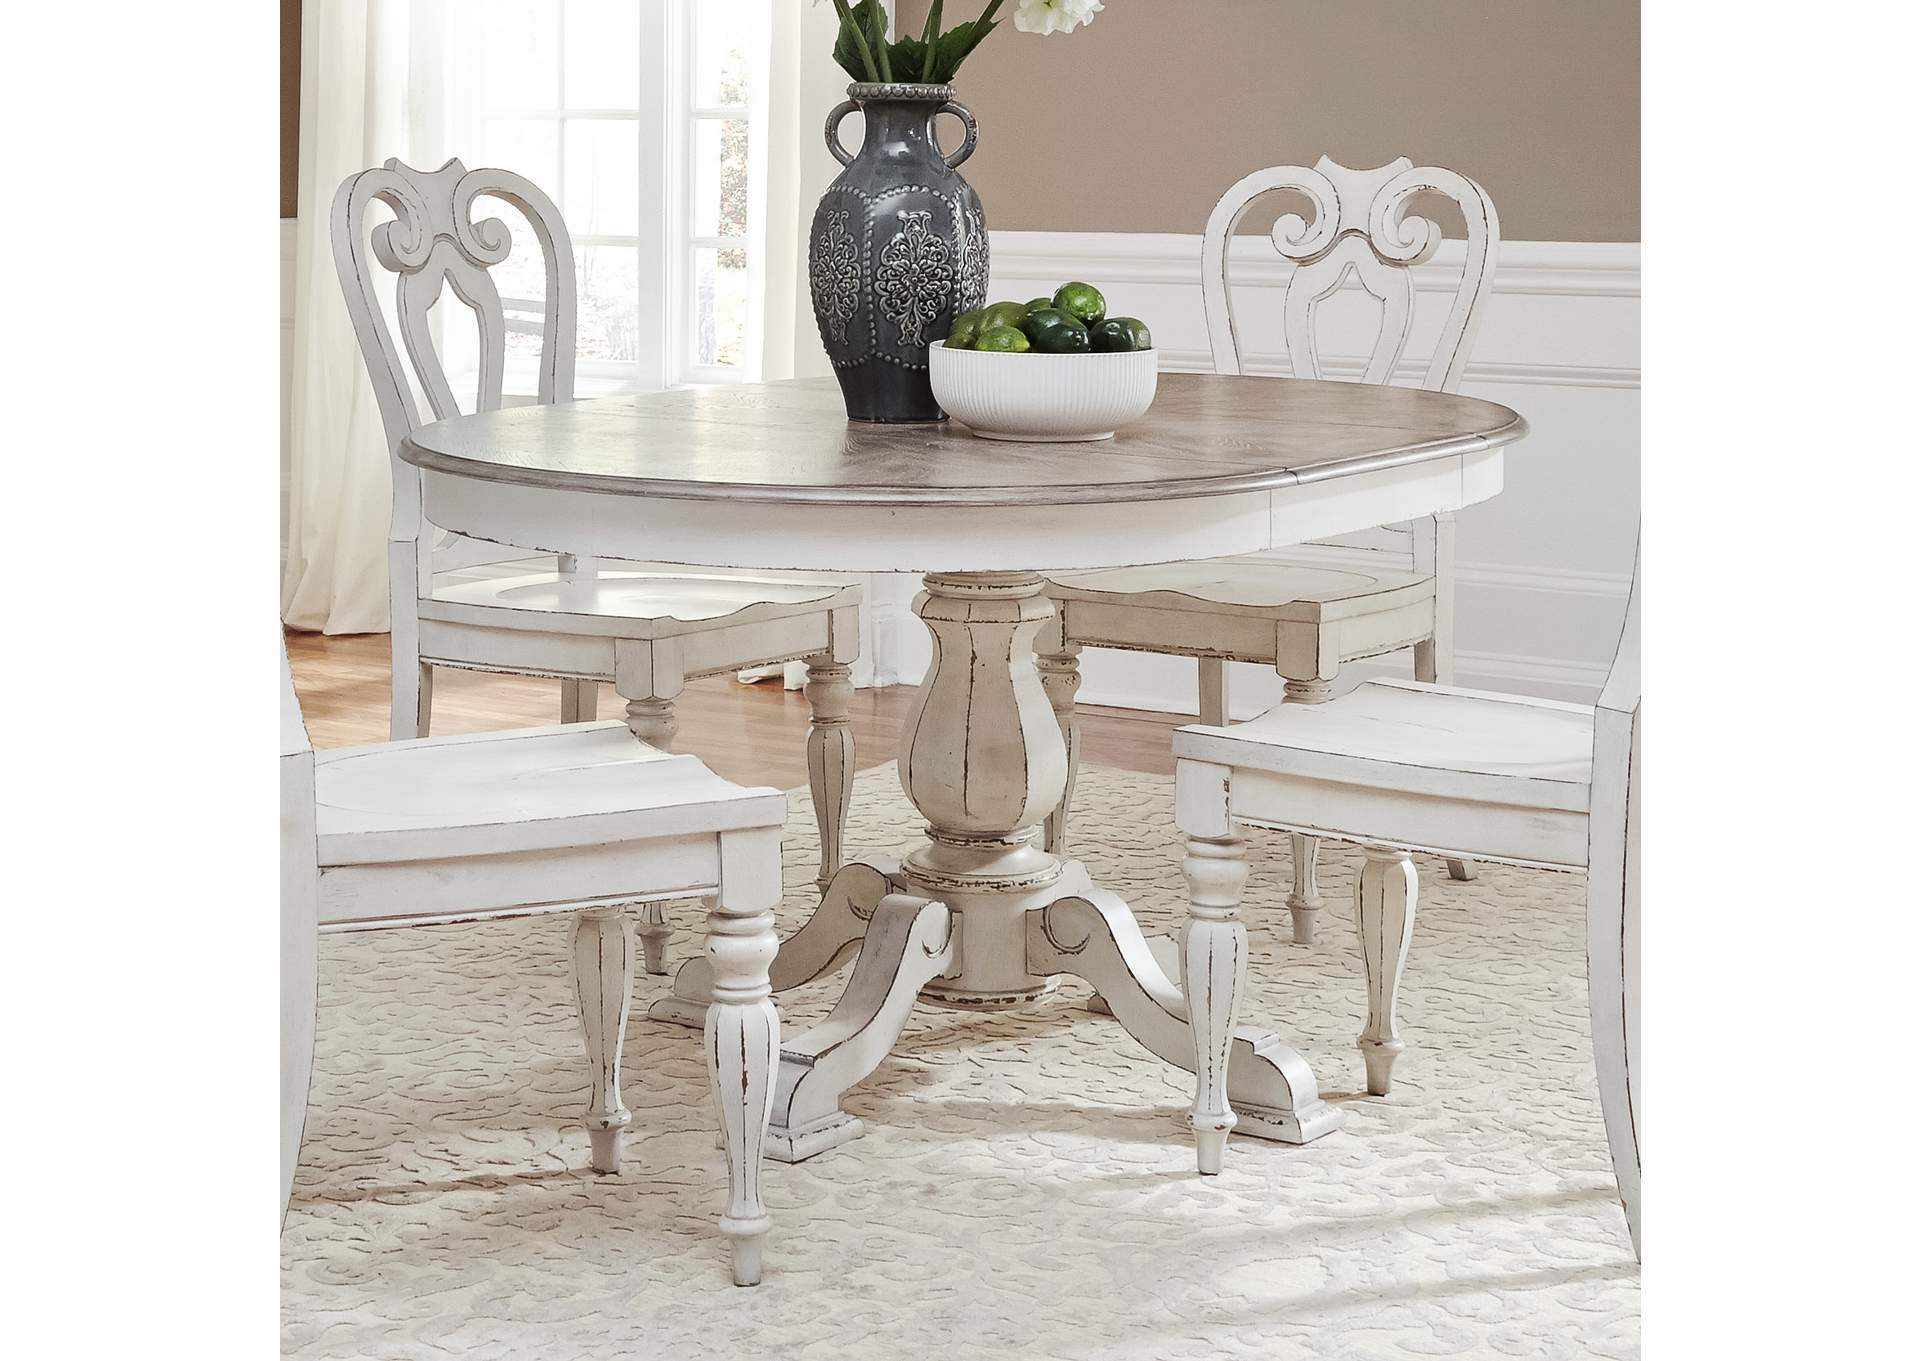 Magnolia Manor White Extension Leaf Dining Table,Liberty